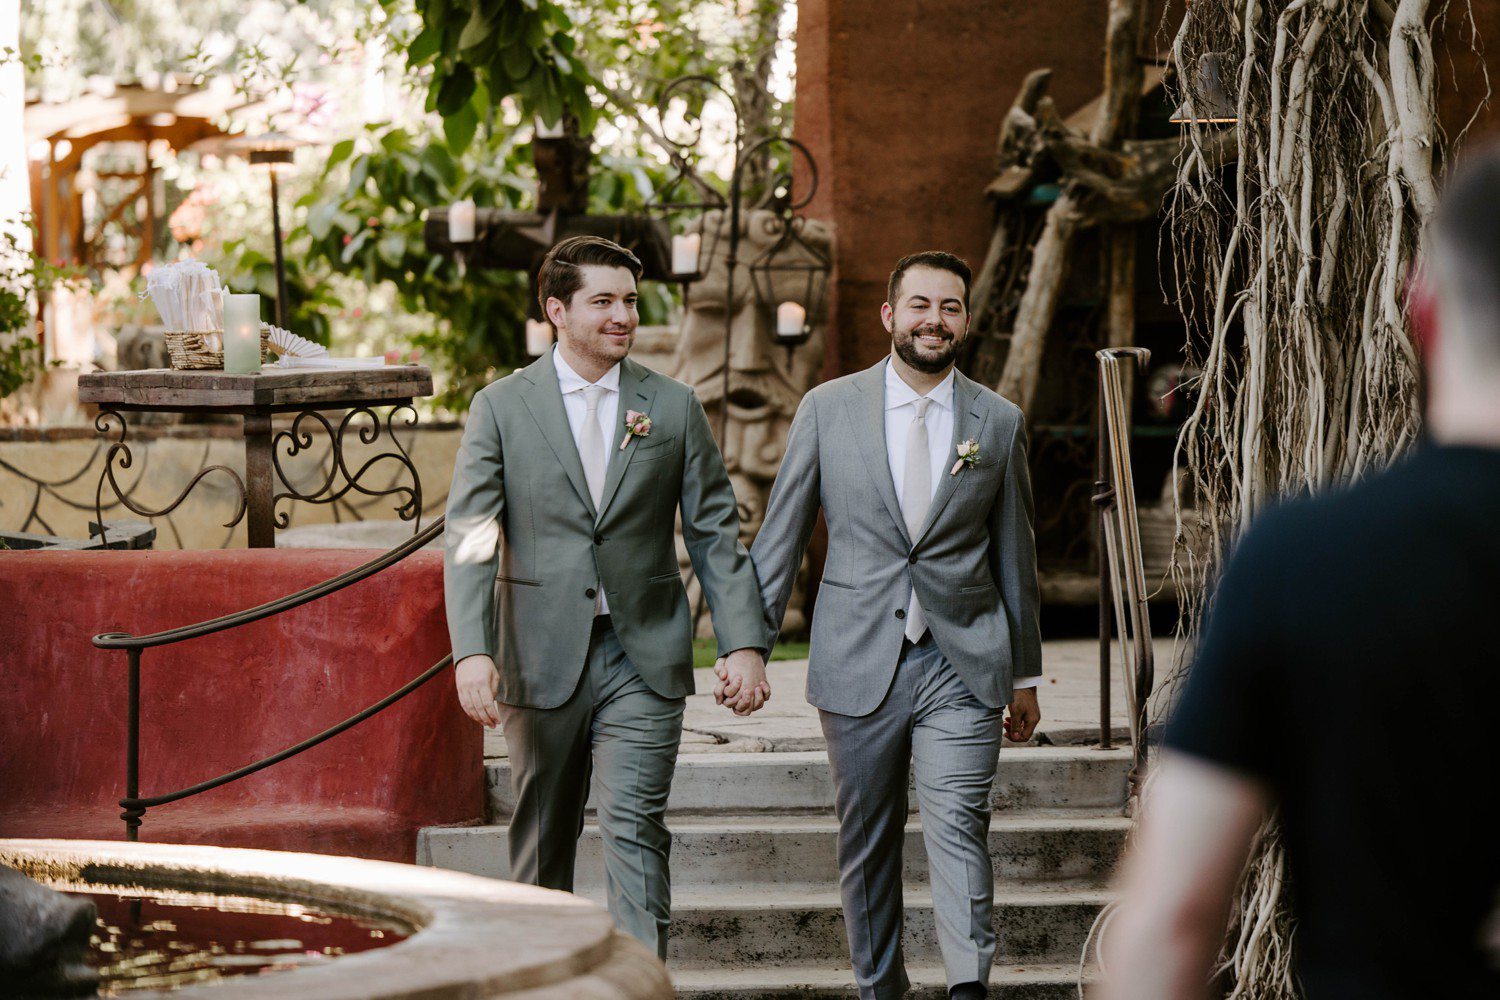 Two grooms walking down the aisle together.